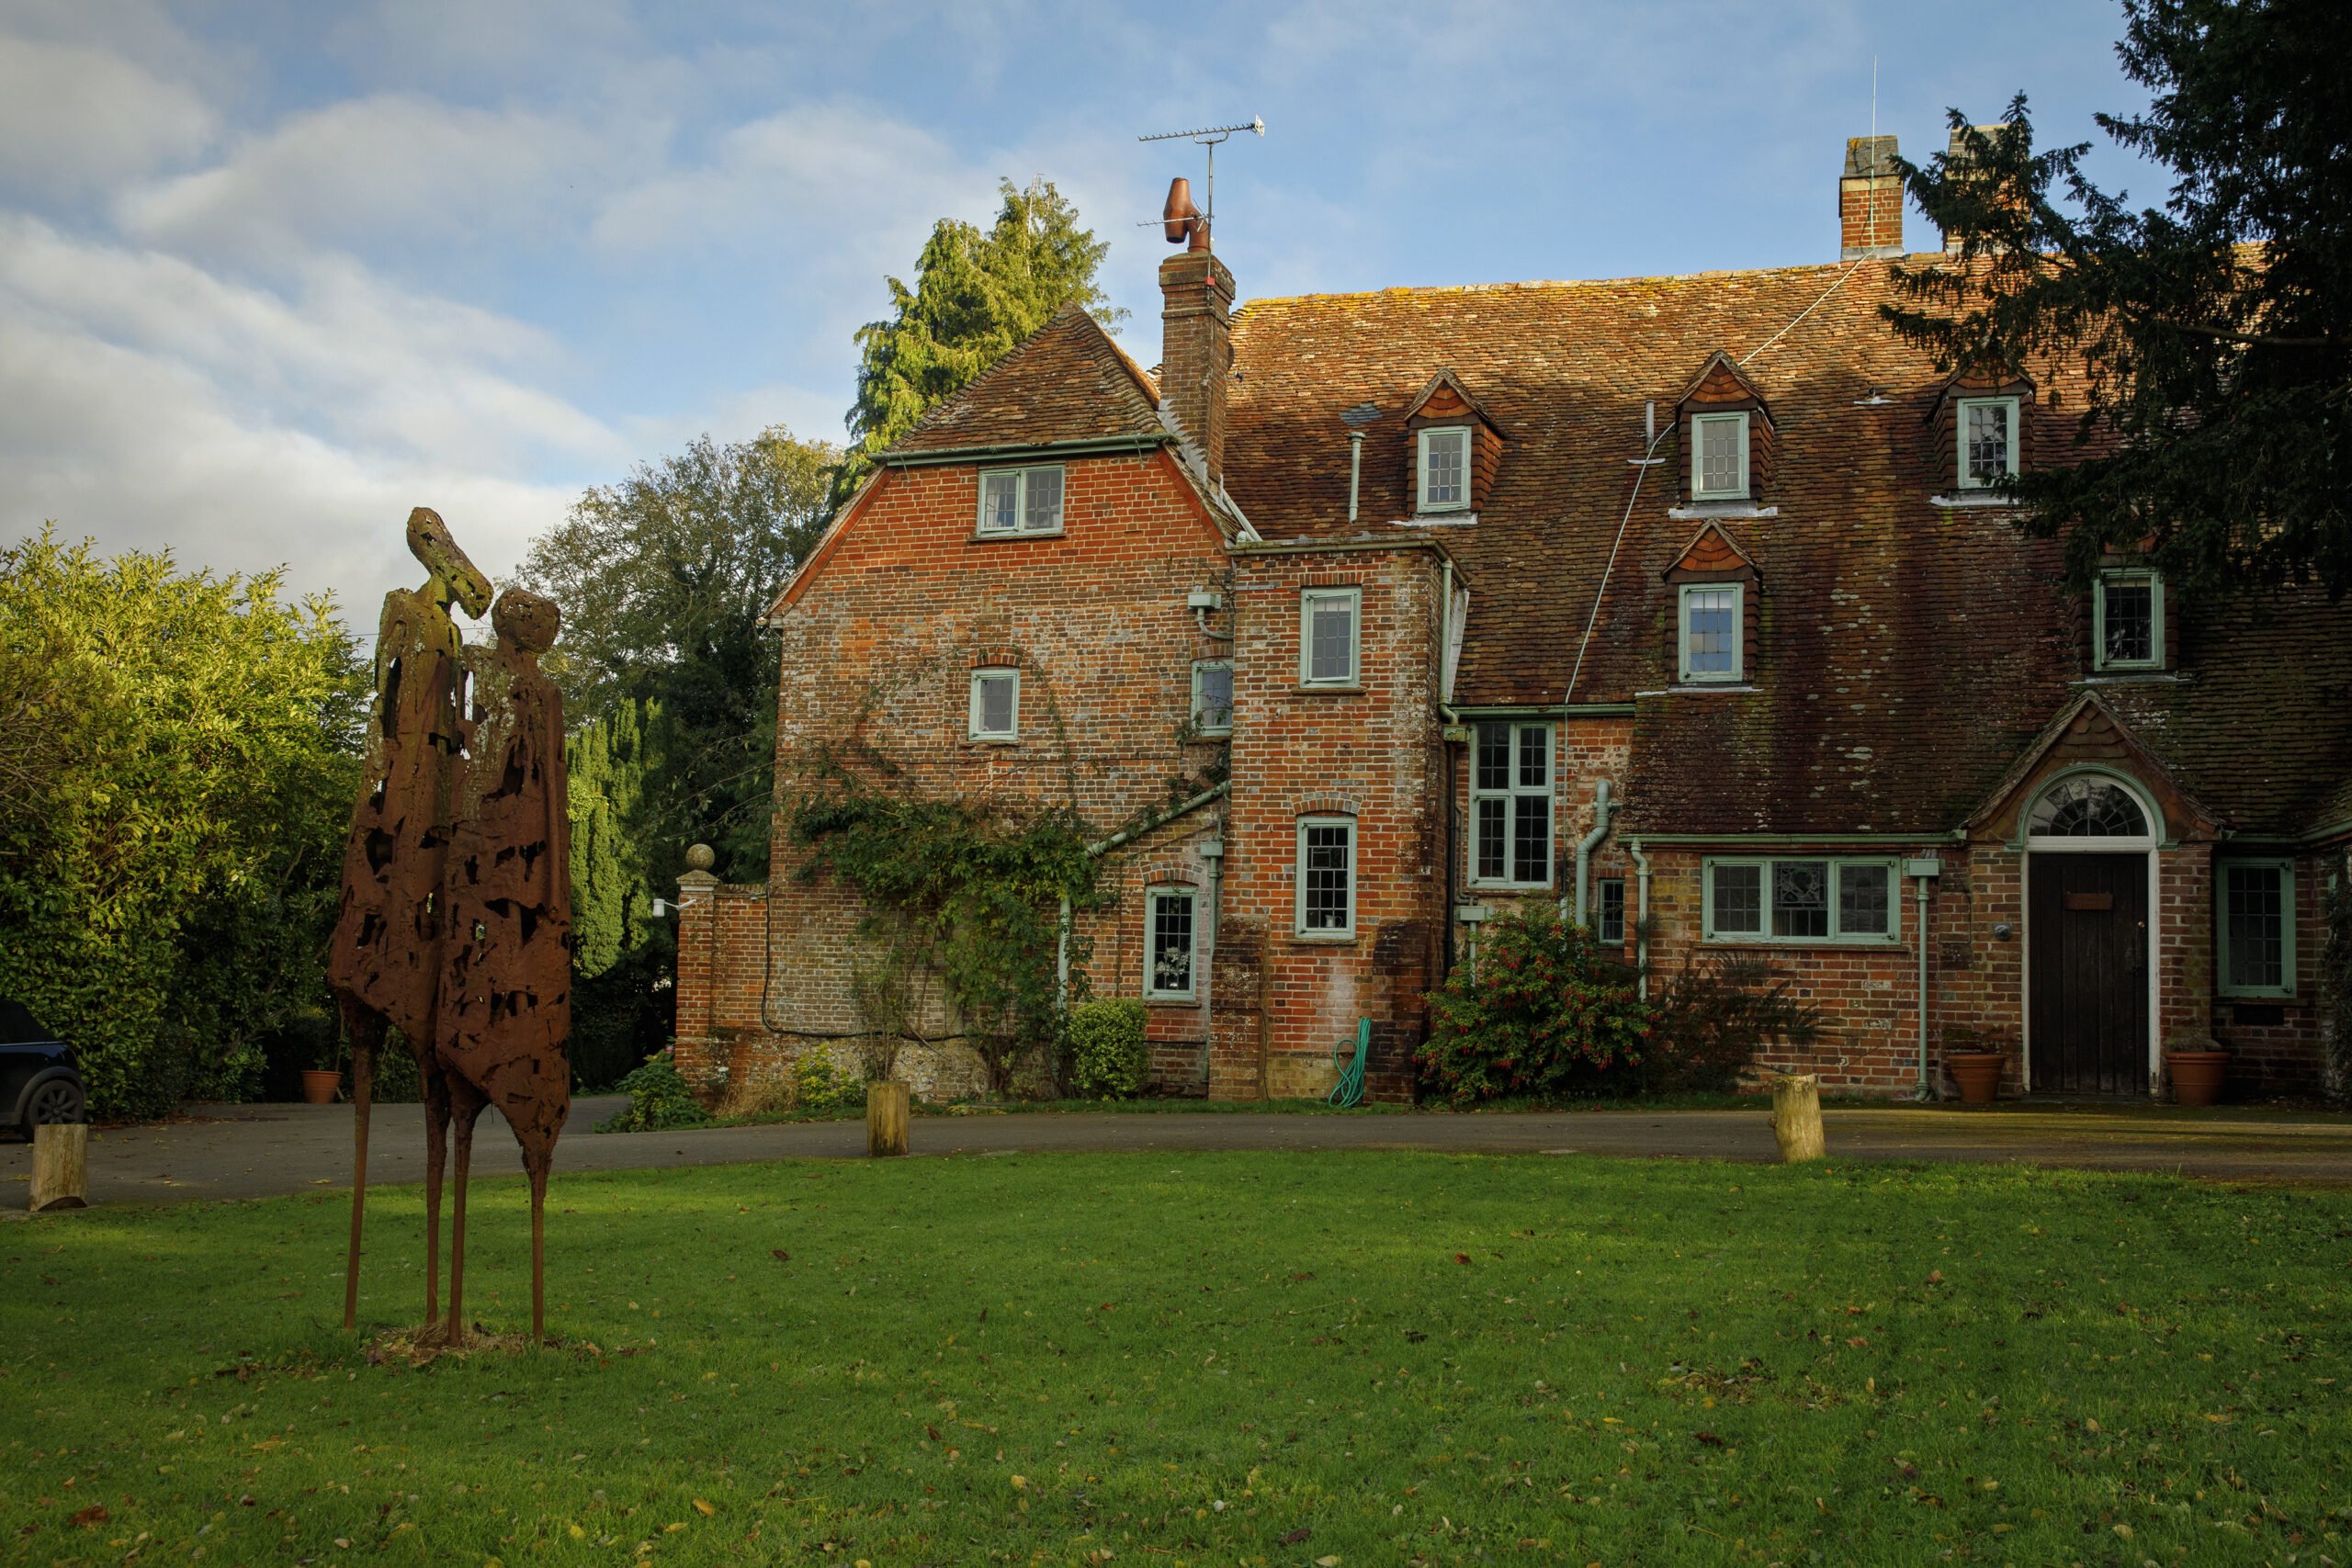 Riversdown House, Hampshire, SouthCoast LocationFinder